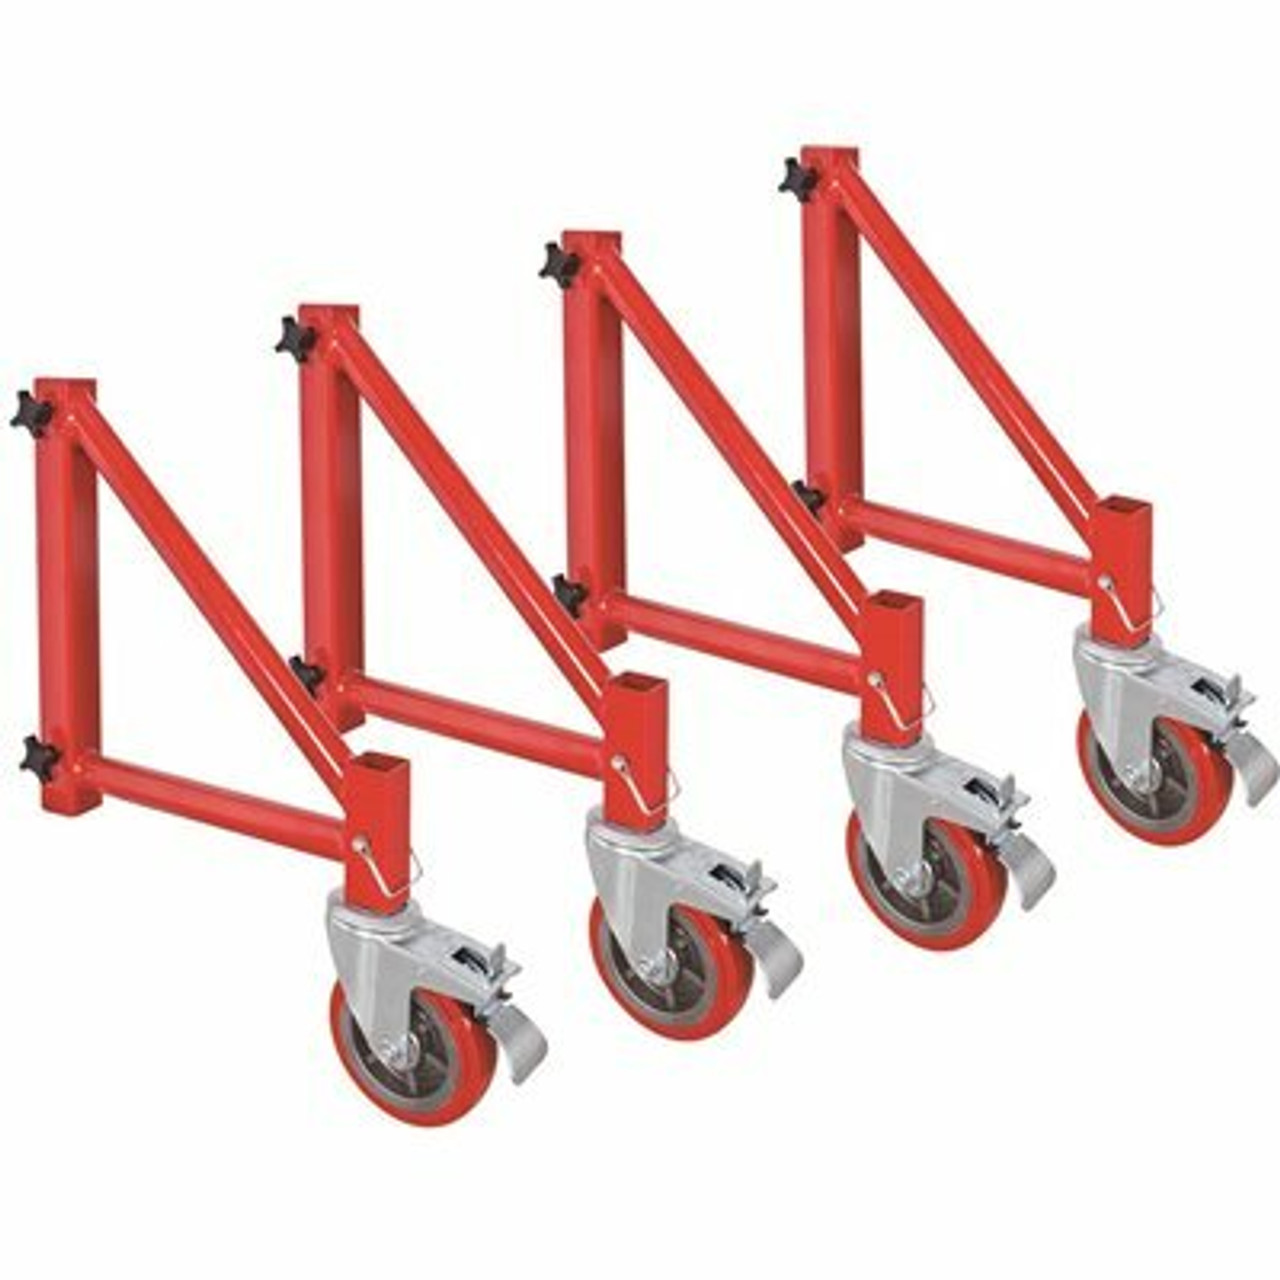 26.5 In. Outrigger Set W/6 In. Caster Wheels, Heavy-Duty Scaffolding Equipment For 6 Ft. Baker Scaffold I-Bmss(Set Of 4)